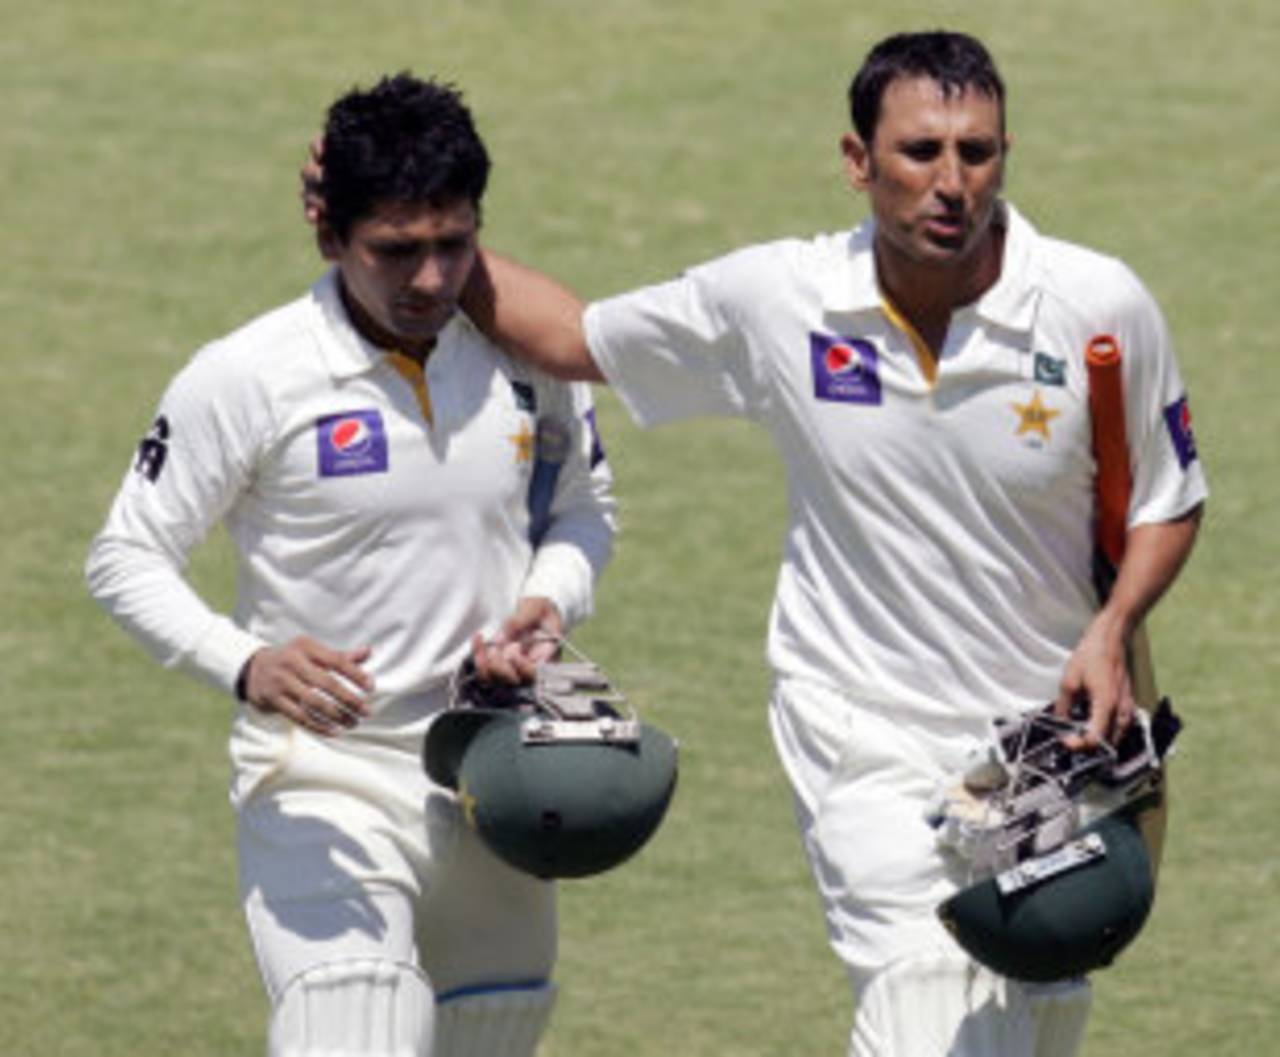 Younis Khan and Adnan Akmal walk off the pitch for the lunch break, Zimbabwe v Pakistan, 1st Test, 4th day, Harare, September 6, 2013